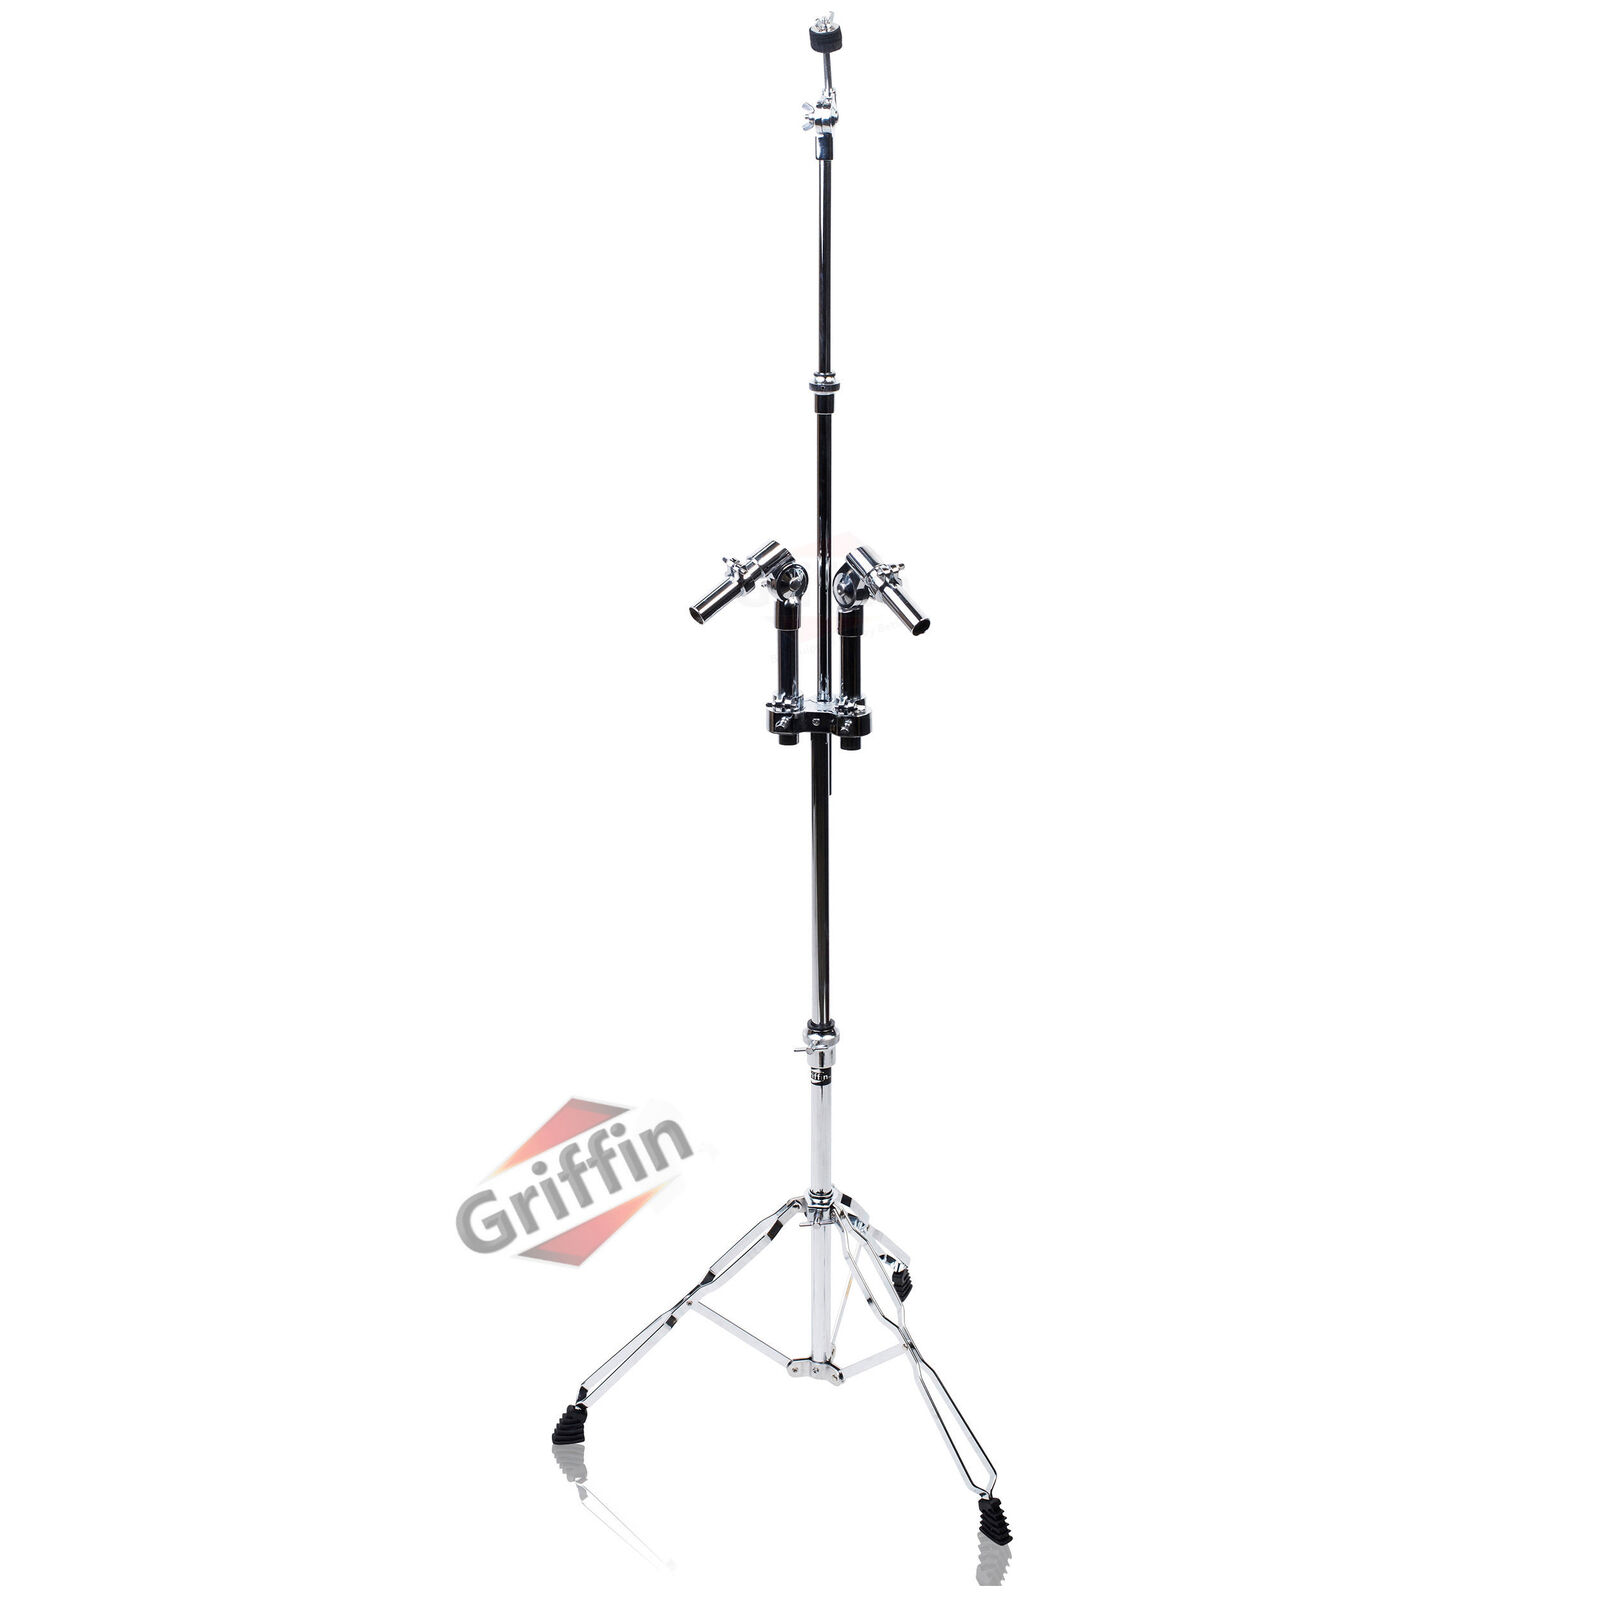 Double Tom Drum Stand - GRIFFIN Cymbal Holder Mount Arm Duel Percussion Hardware